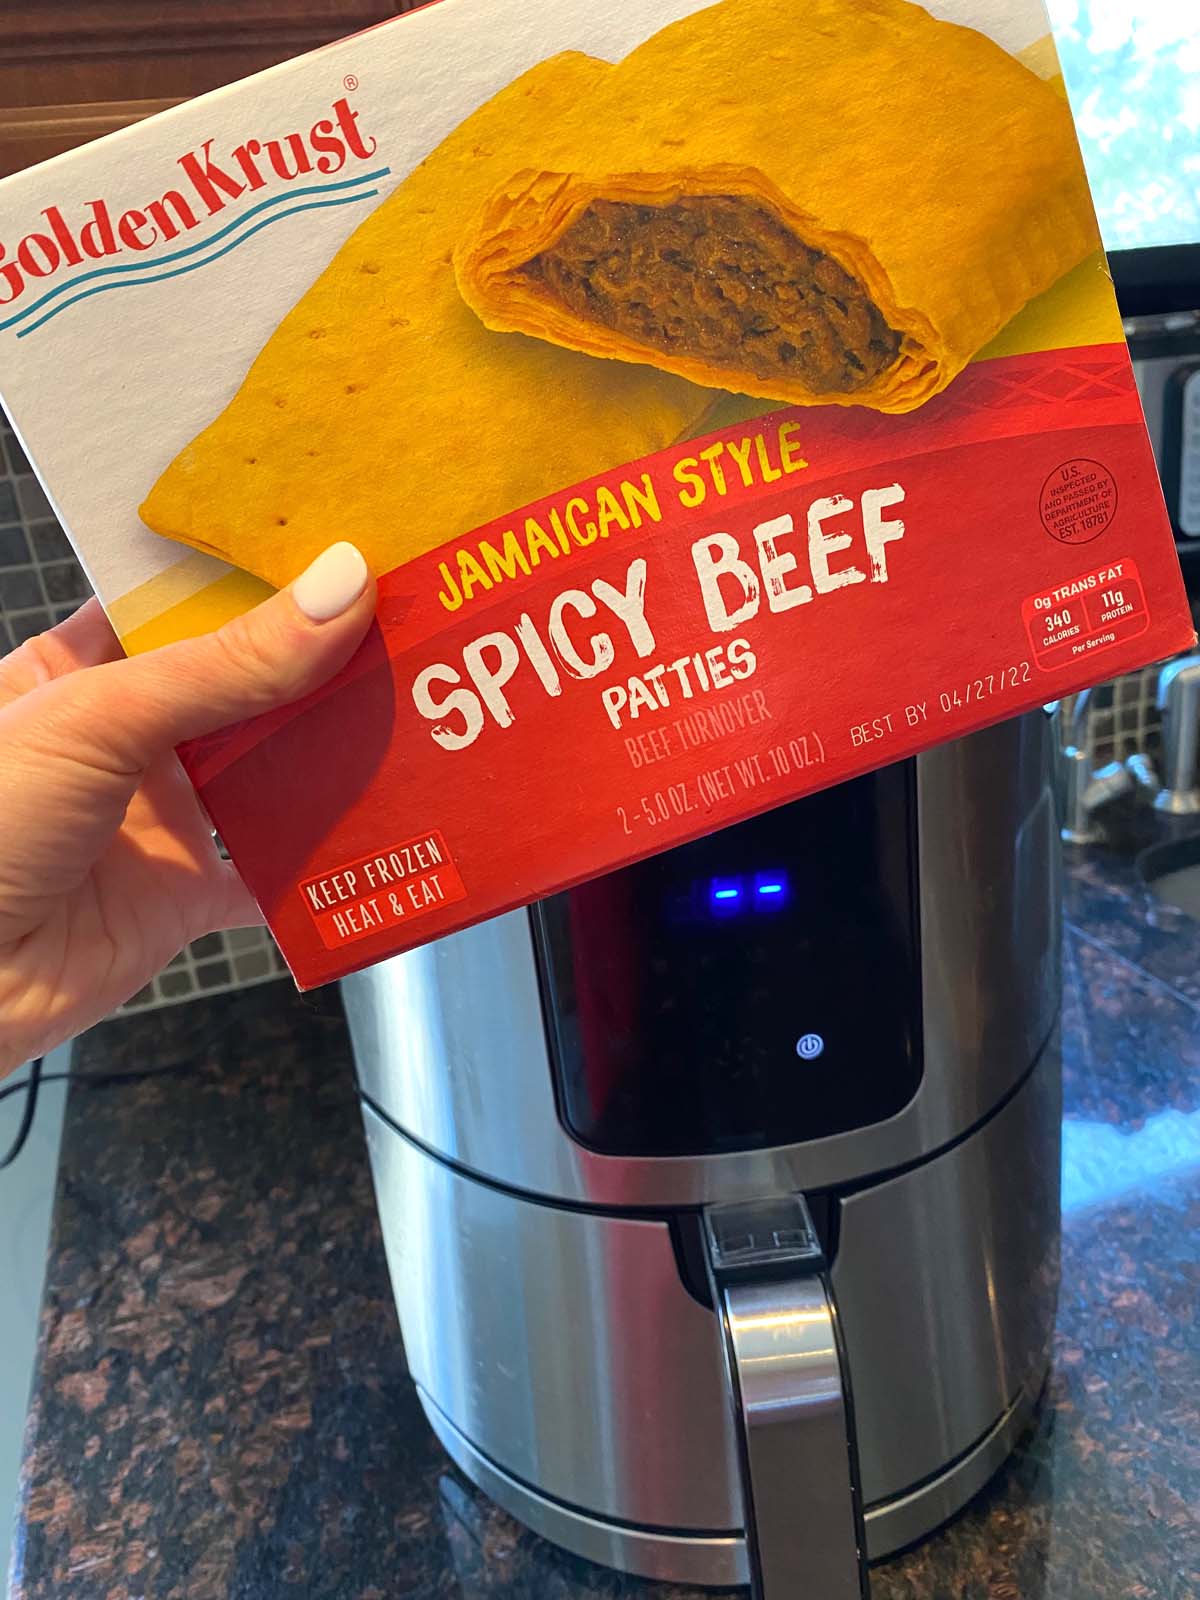 A package of Jamaican beef patties being held in up in front of an air fryer with the box next to it.